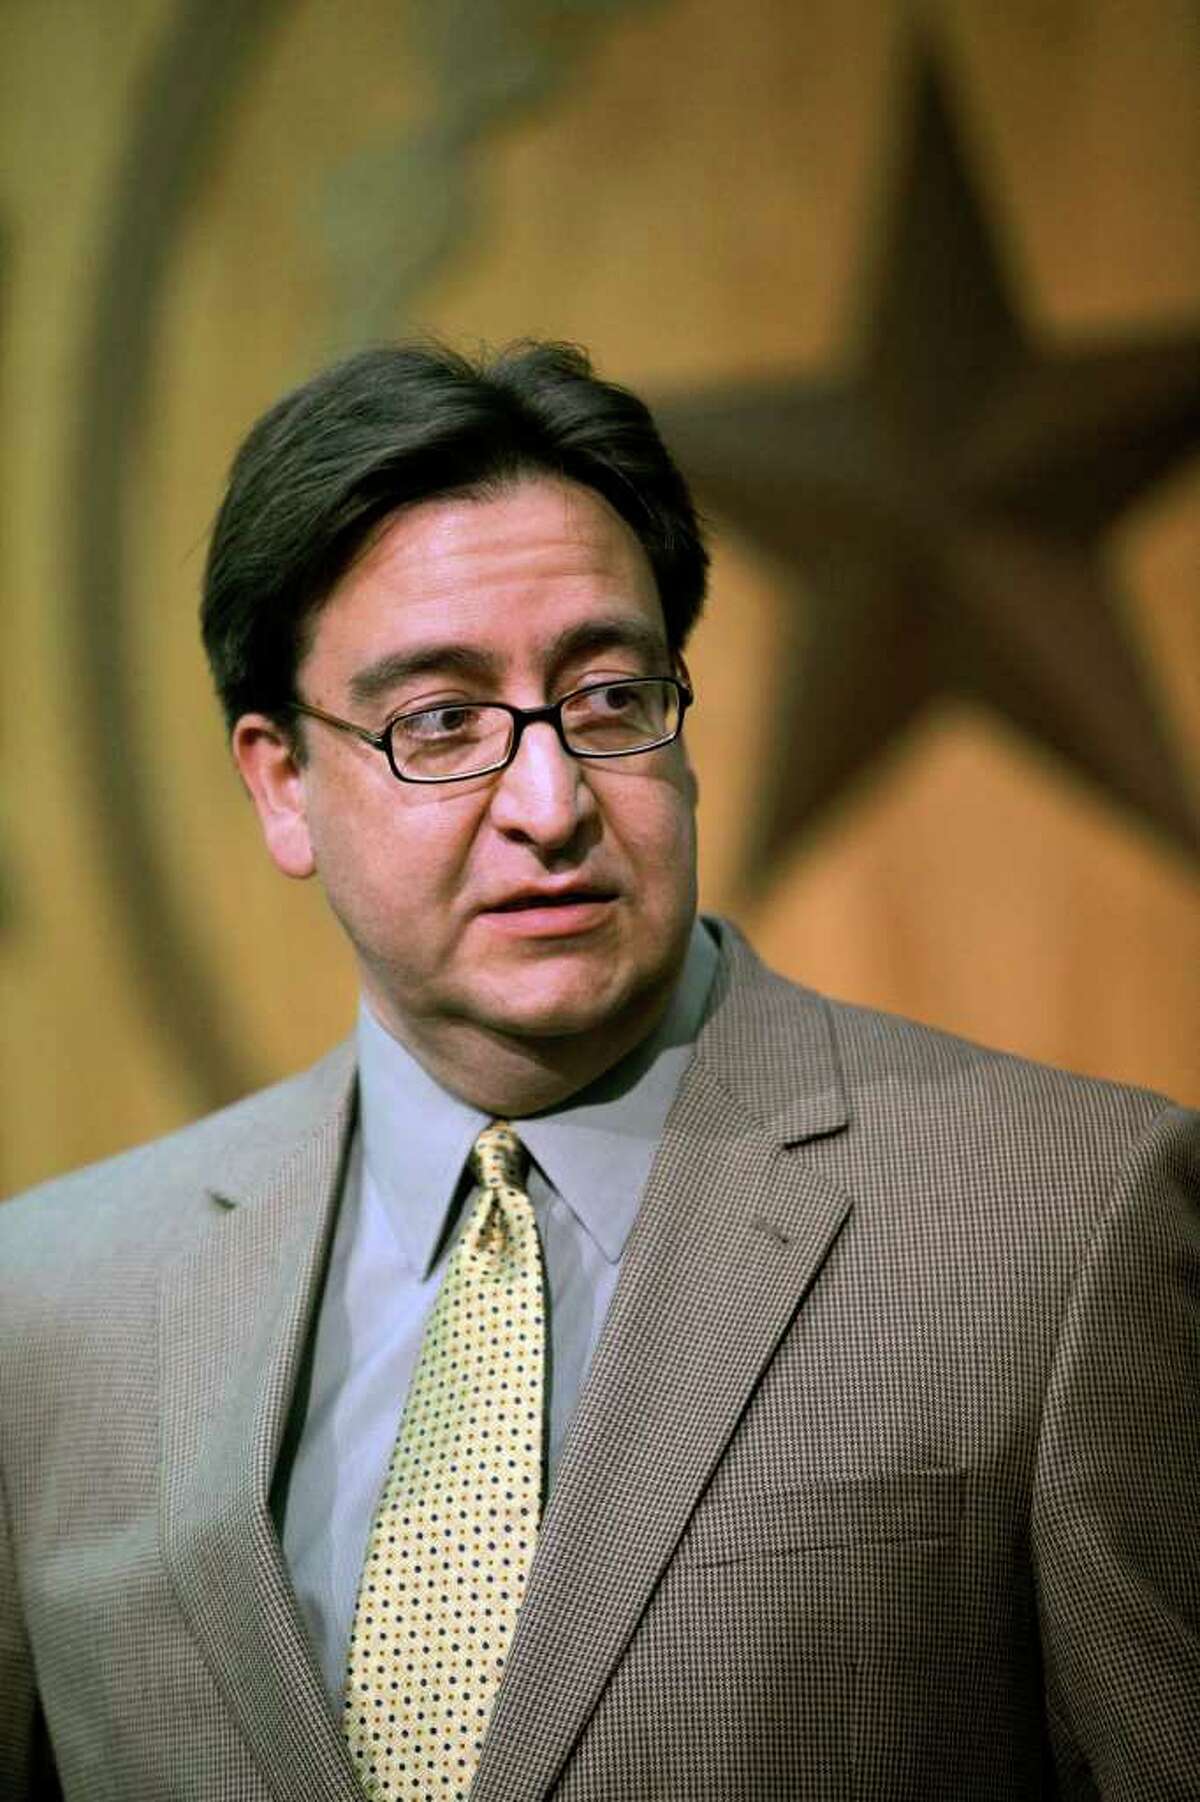 State Rep. Pete Gallego: “We’ve got to tone it down.”